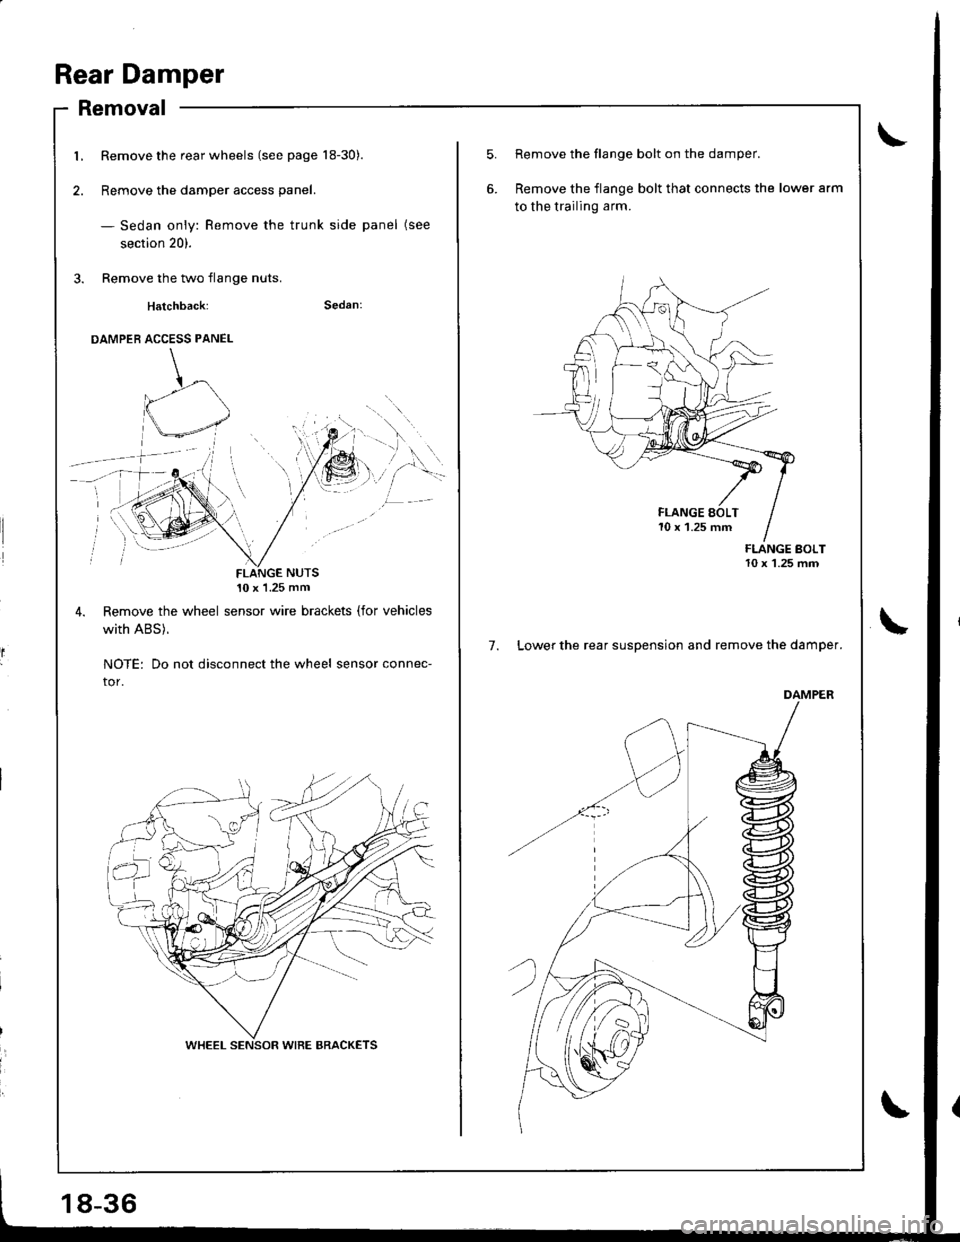 HONDA INTEGRA 1998 4.G Workshop Manual L
I
Rear Damper
Removal
Remove the rear wheels (see page 18-30).
Remove the damper access panel.
- Sedan only: Remove the trunk side panel (see
section 20).
Remove the two flange nuts.
Hatchback:
DAMP